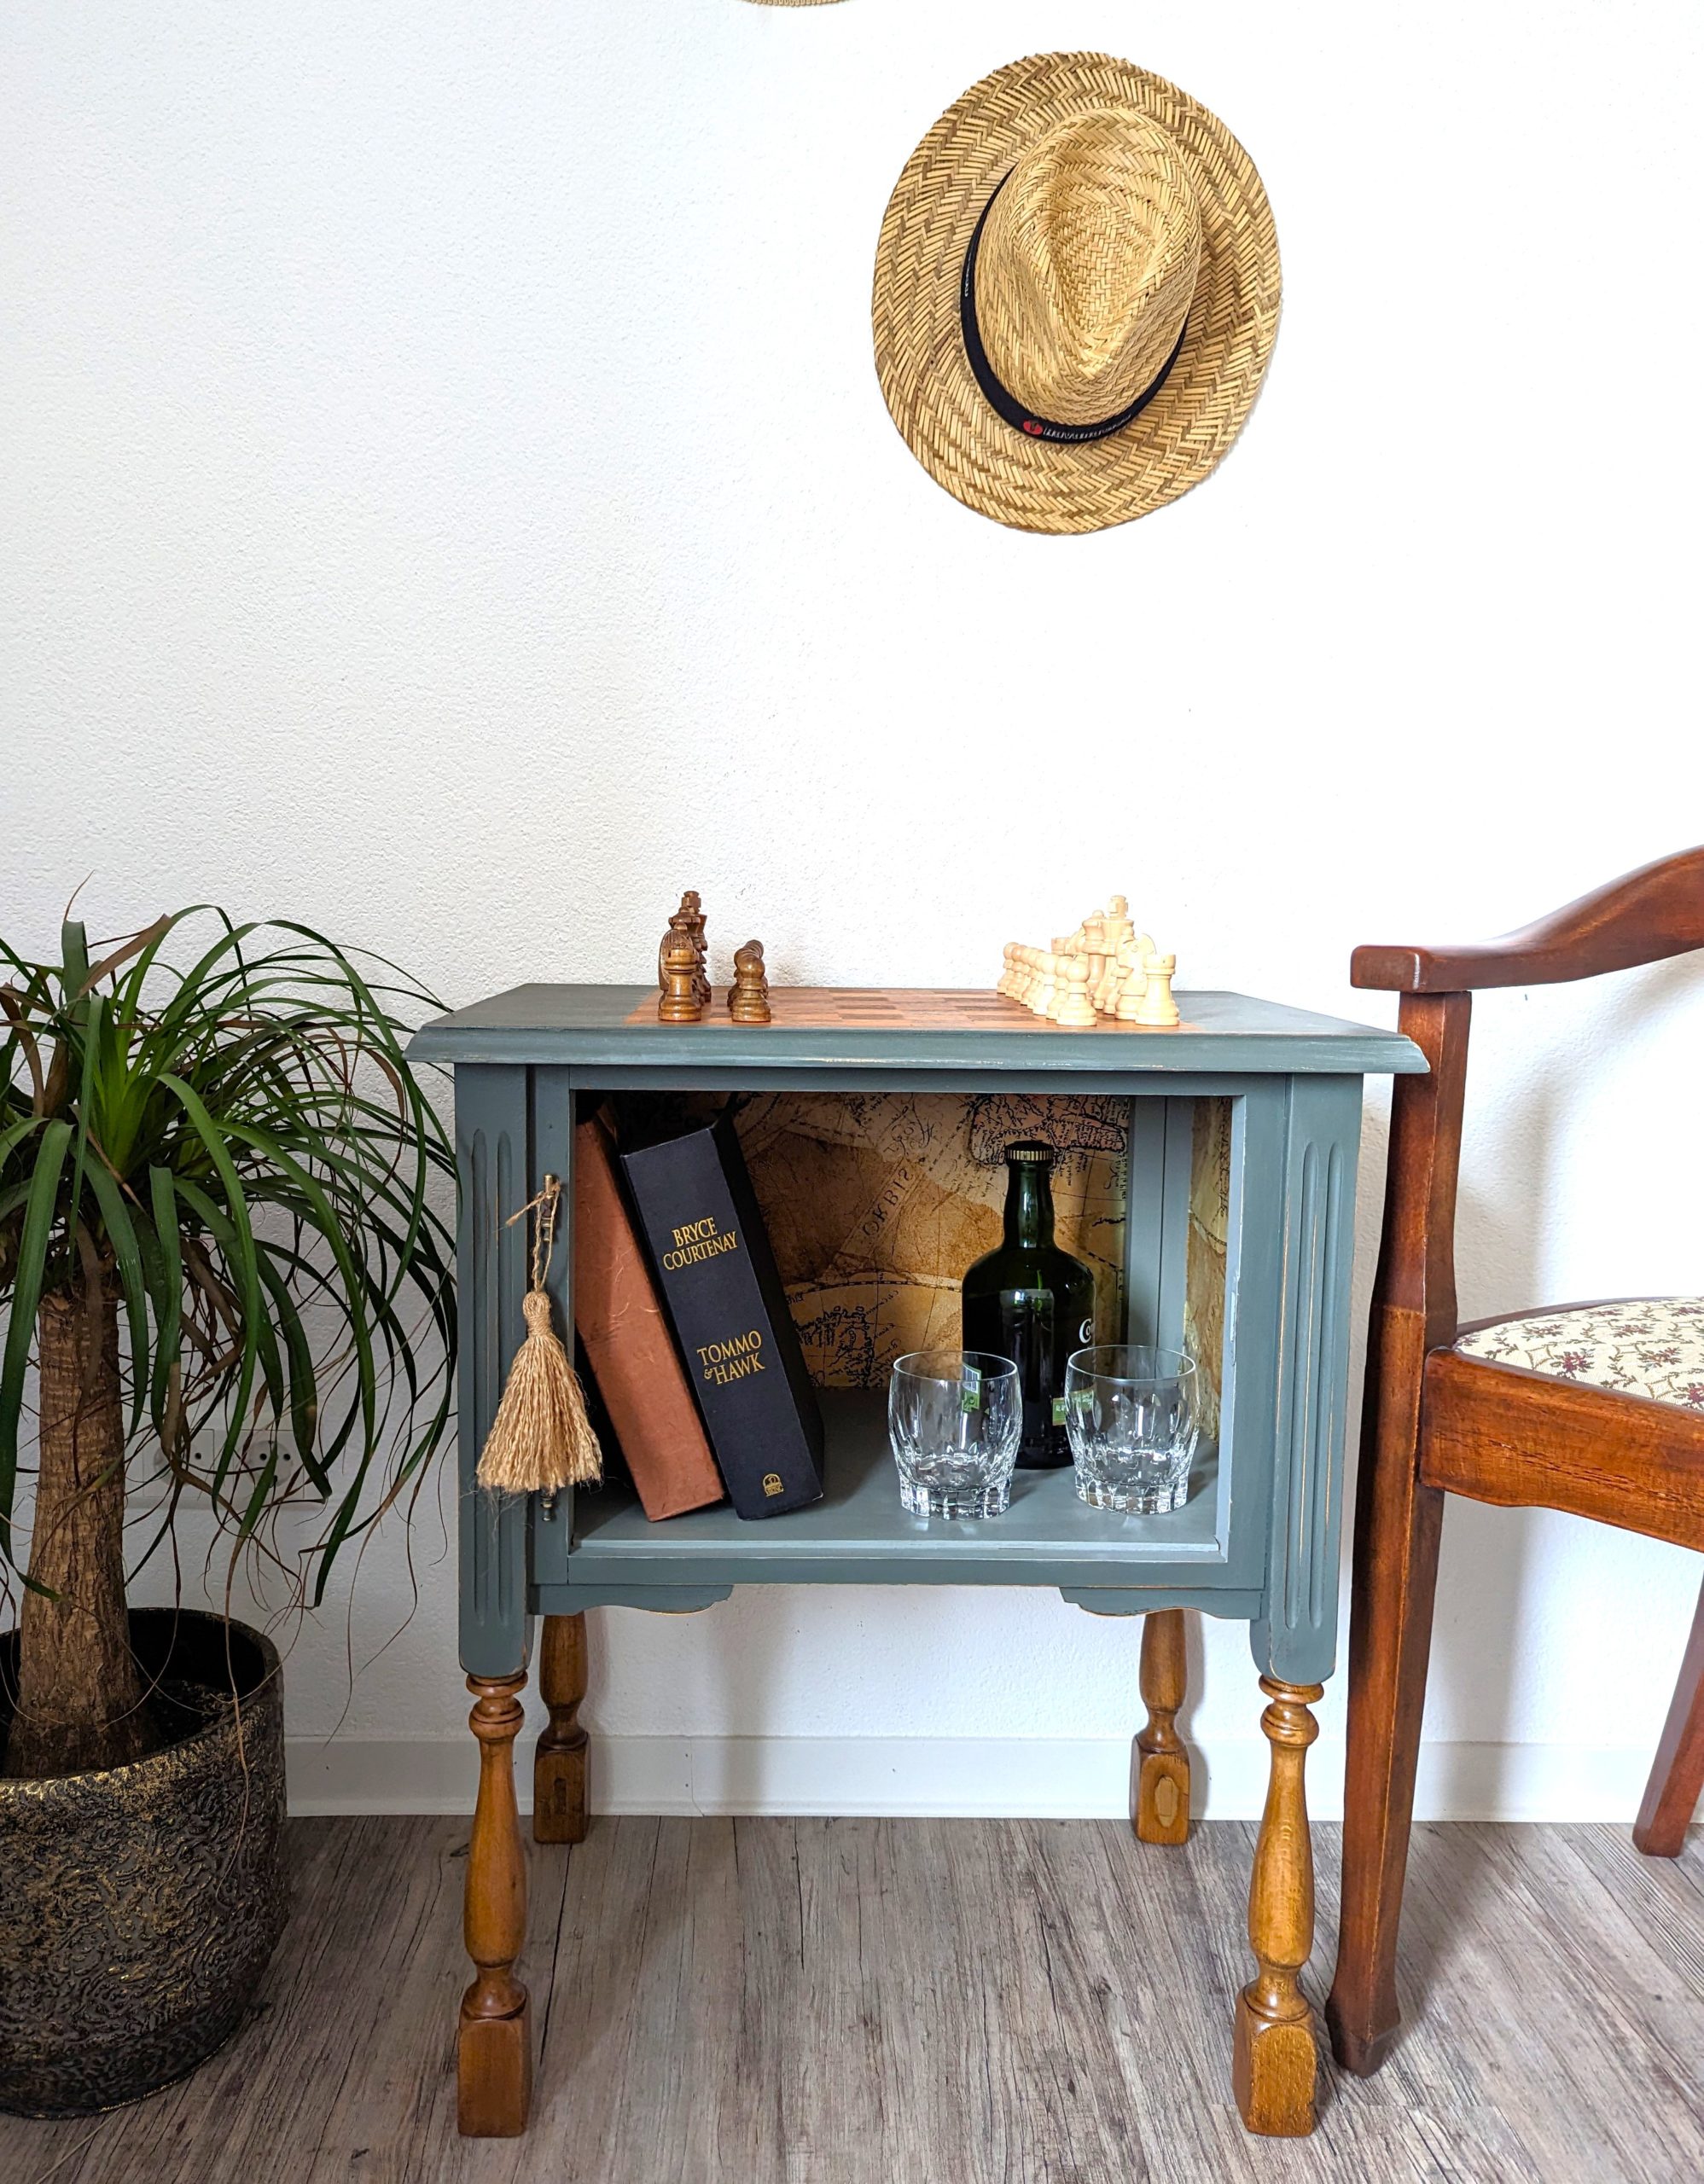 Chessboard side-table inspiration